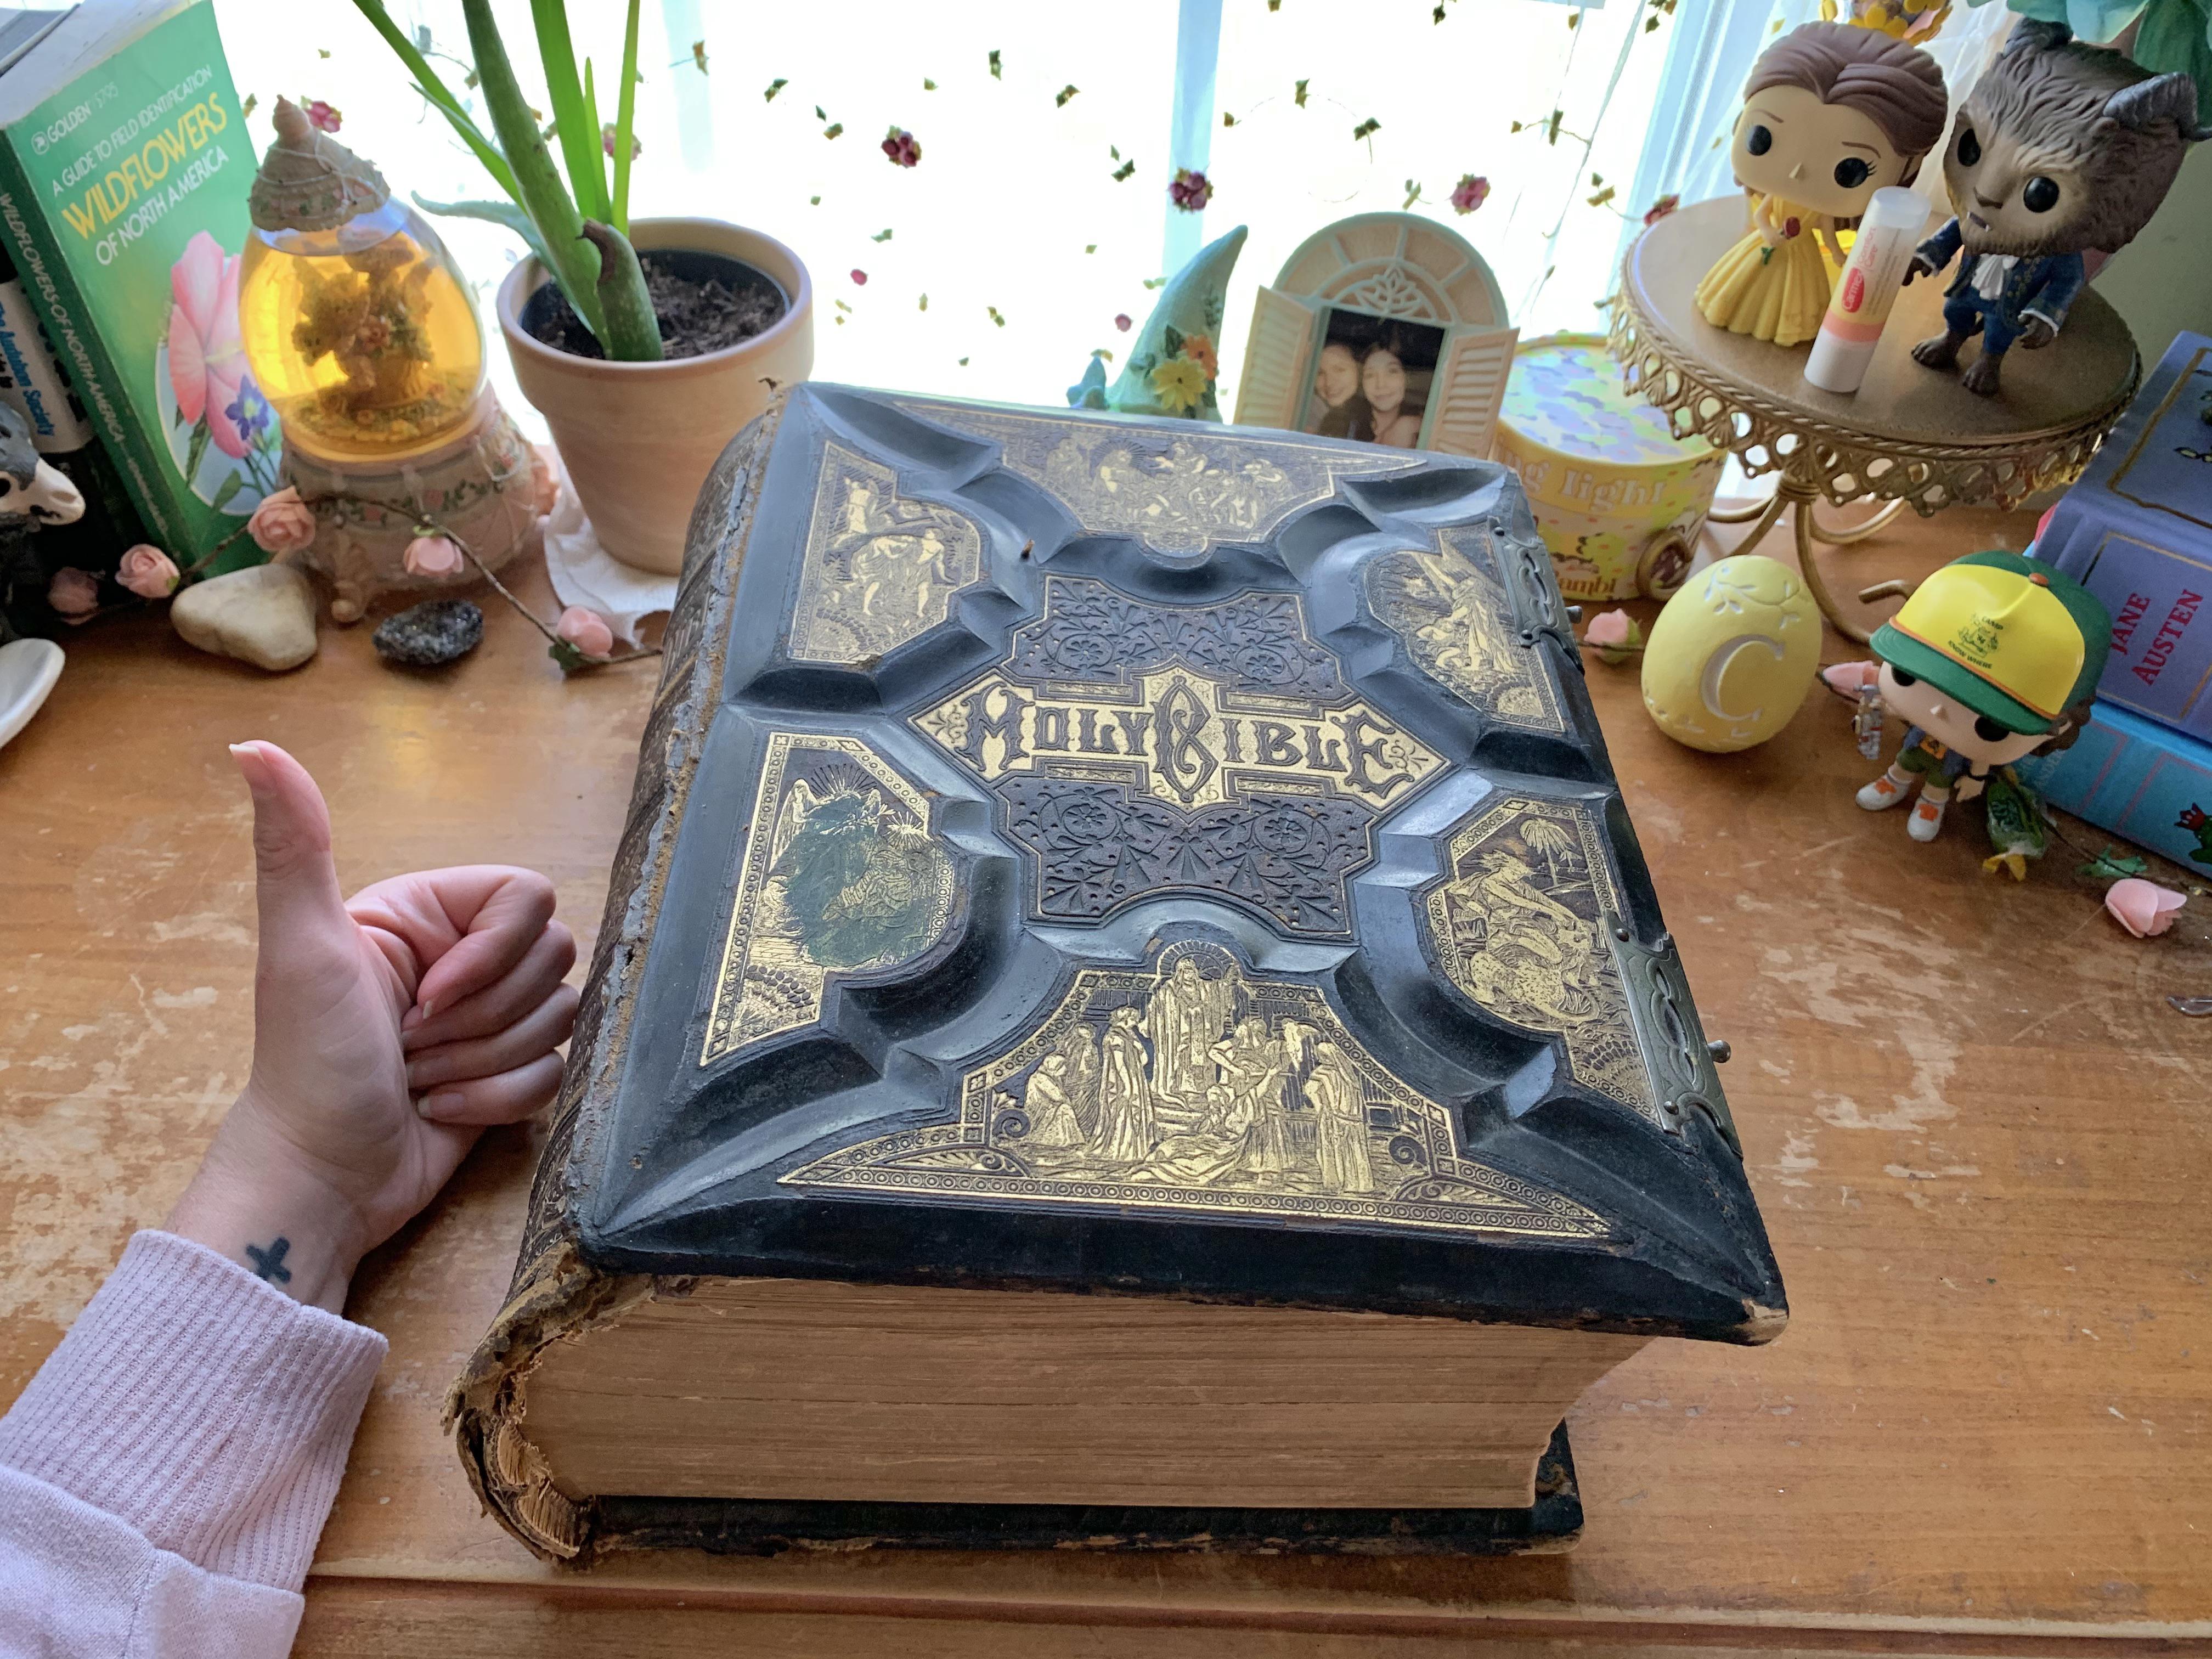 I found this massive 130+ year old Bible at a yard sale today!